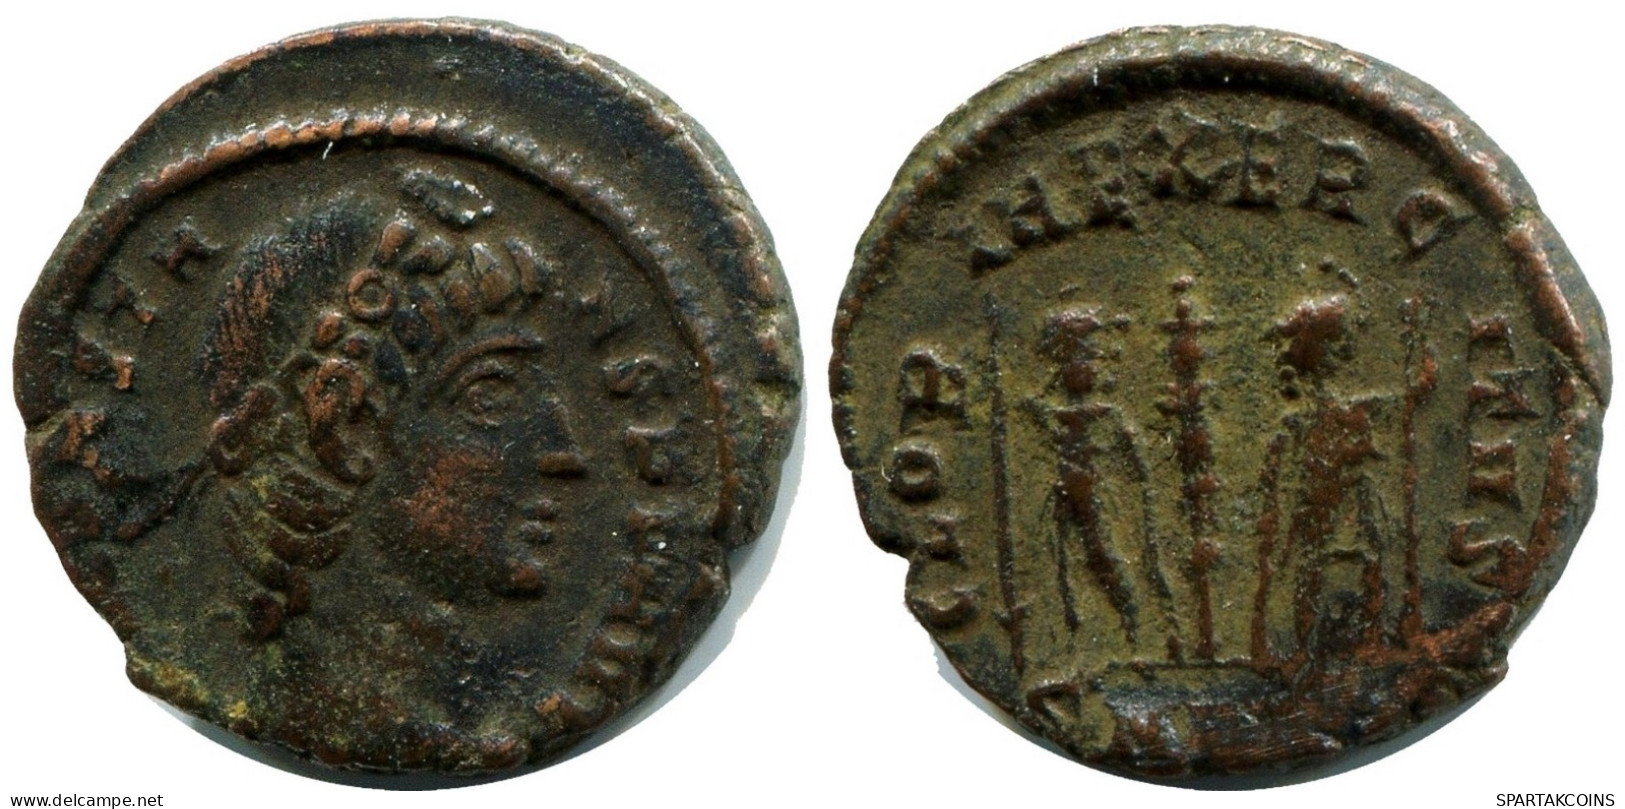 CONSTANS MINTED IN ANTIOCH FOUND IN IHNASYAH HOARD EGYPT #ANC11796.14.U.A - The Christian Empire (307 AD Tot 363 AD)